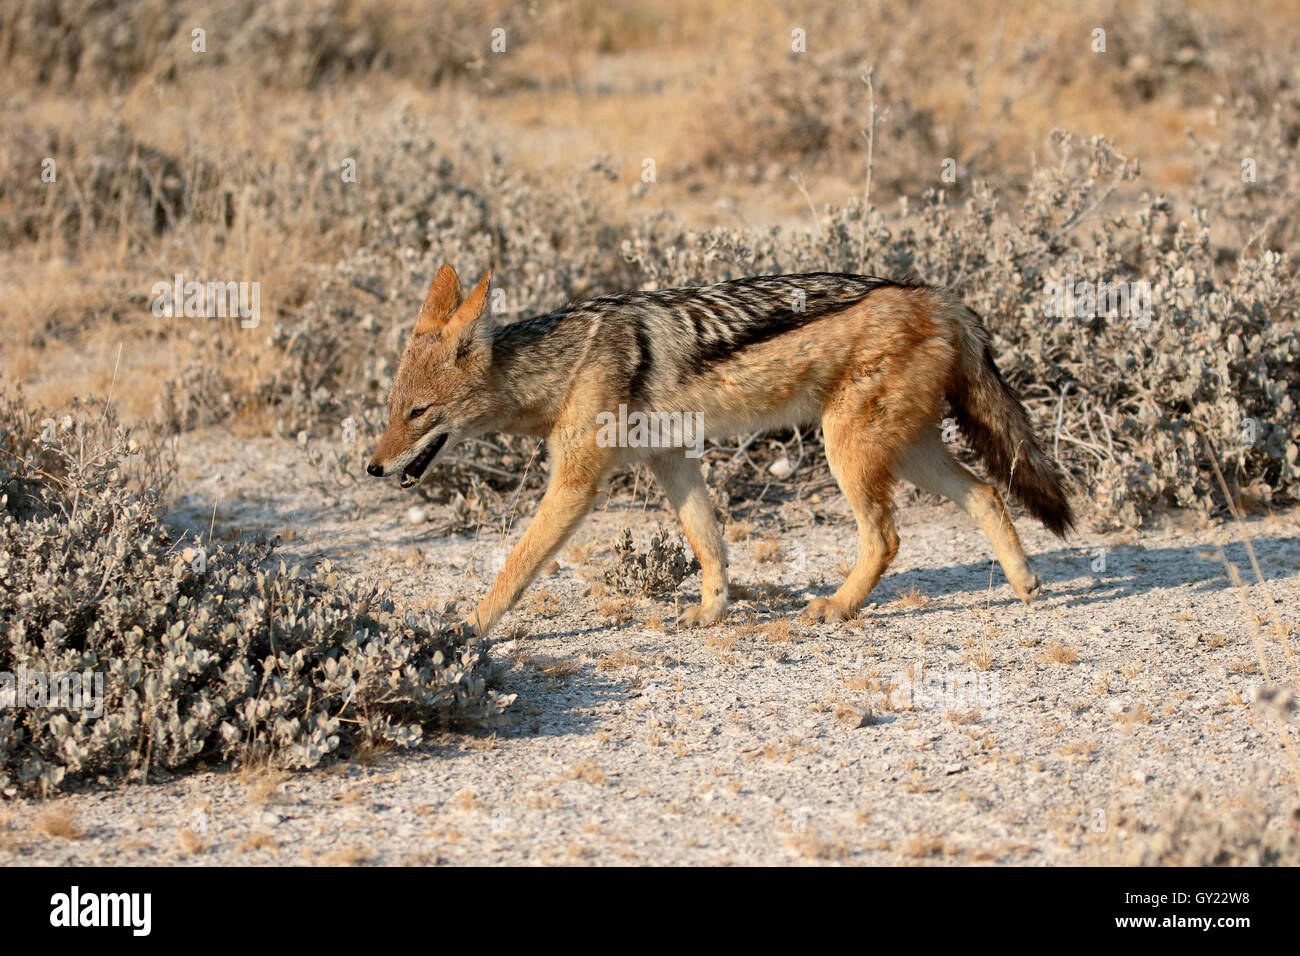 Black-backed jackal, Canis mesomelas, single mammal,     South Africa, August 2016 Stock Photo